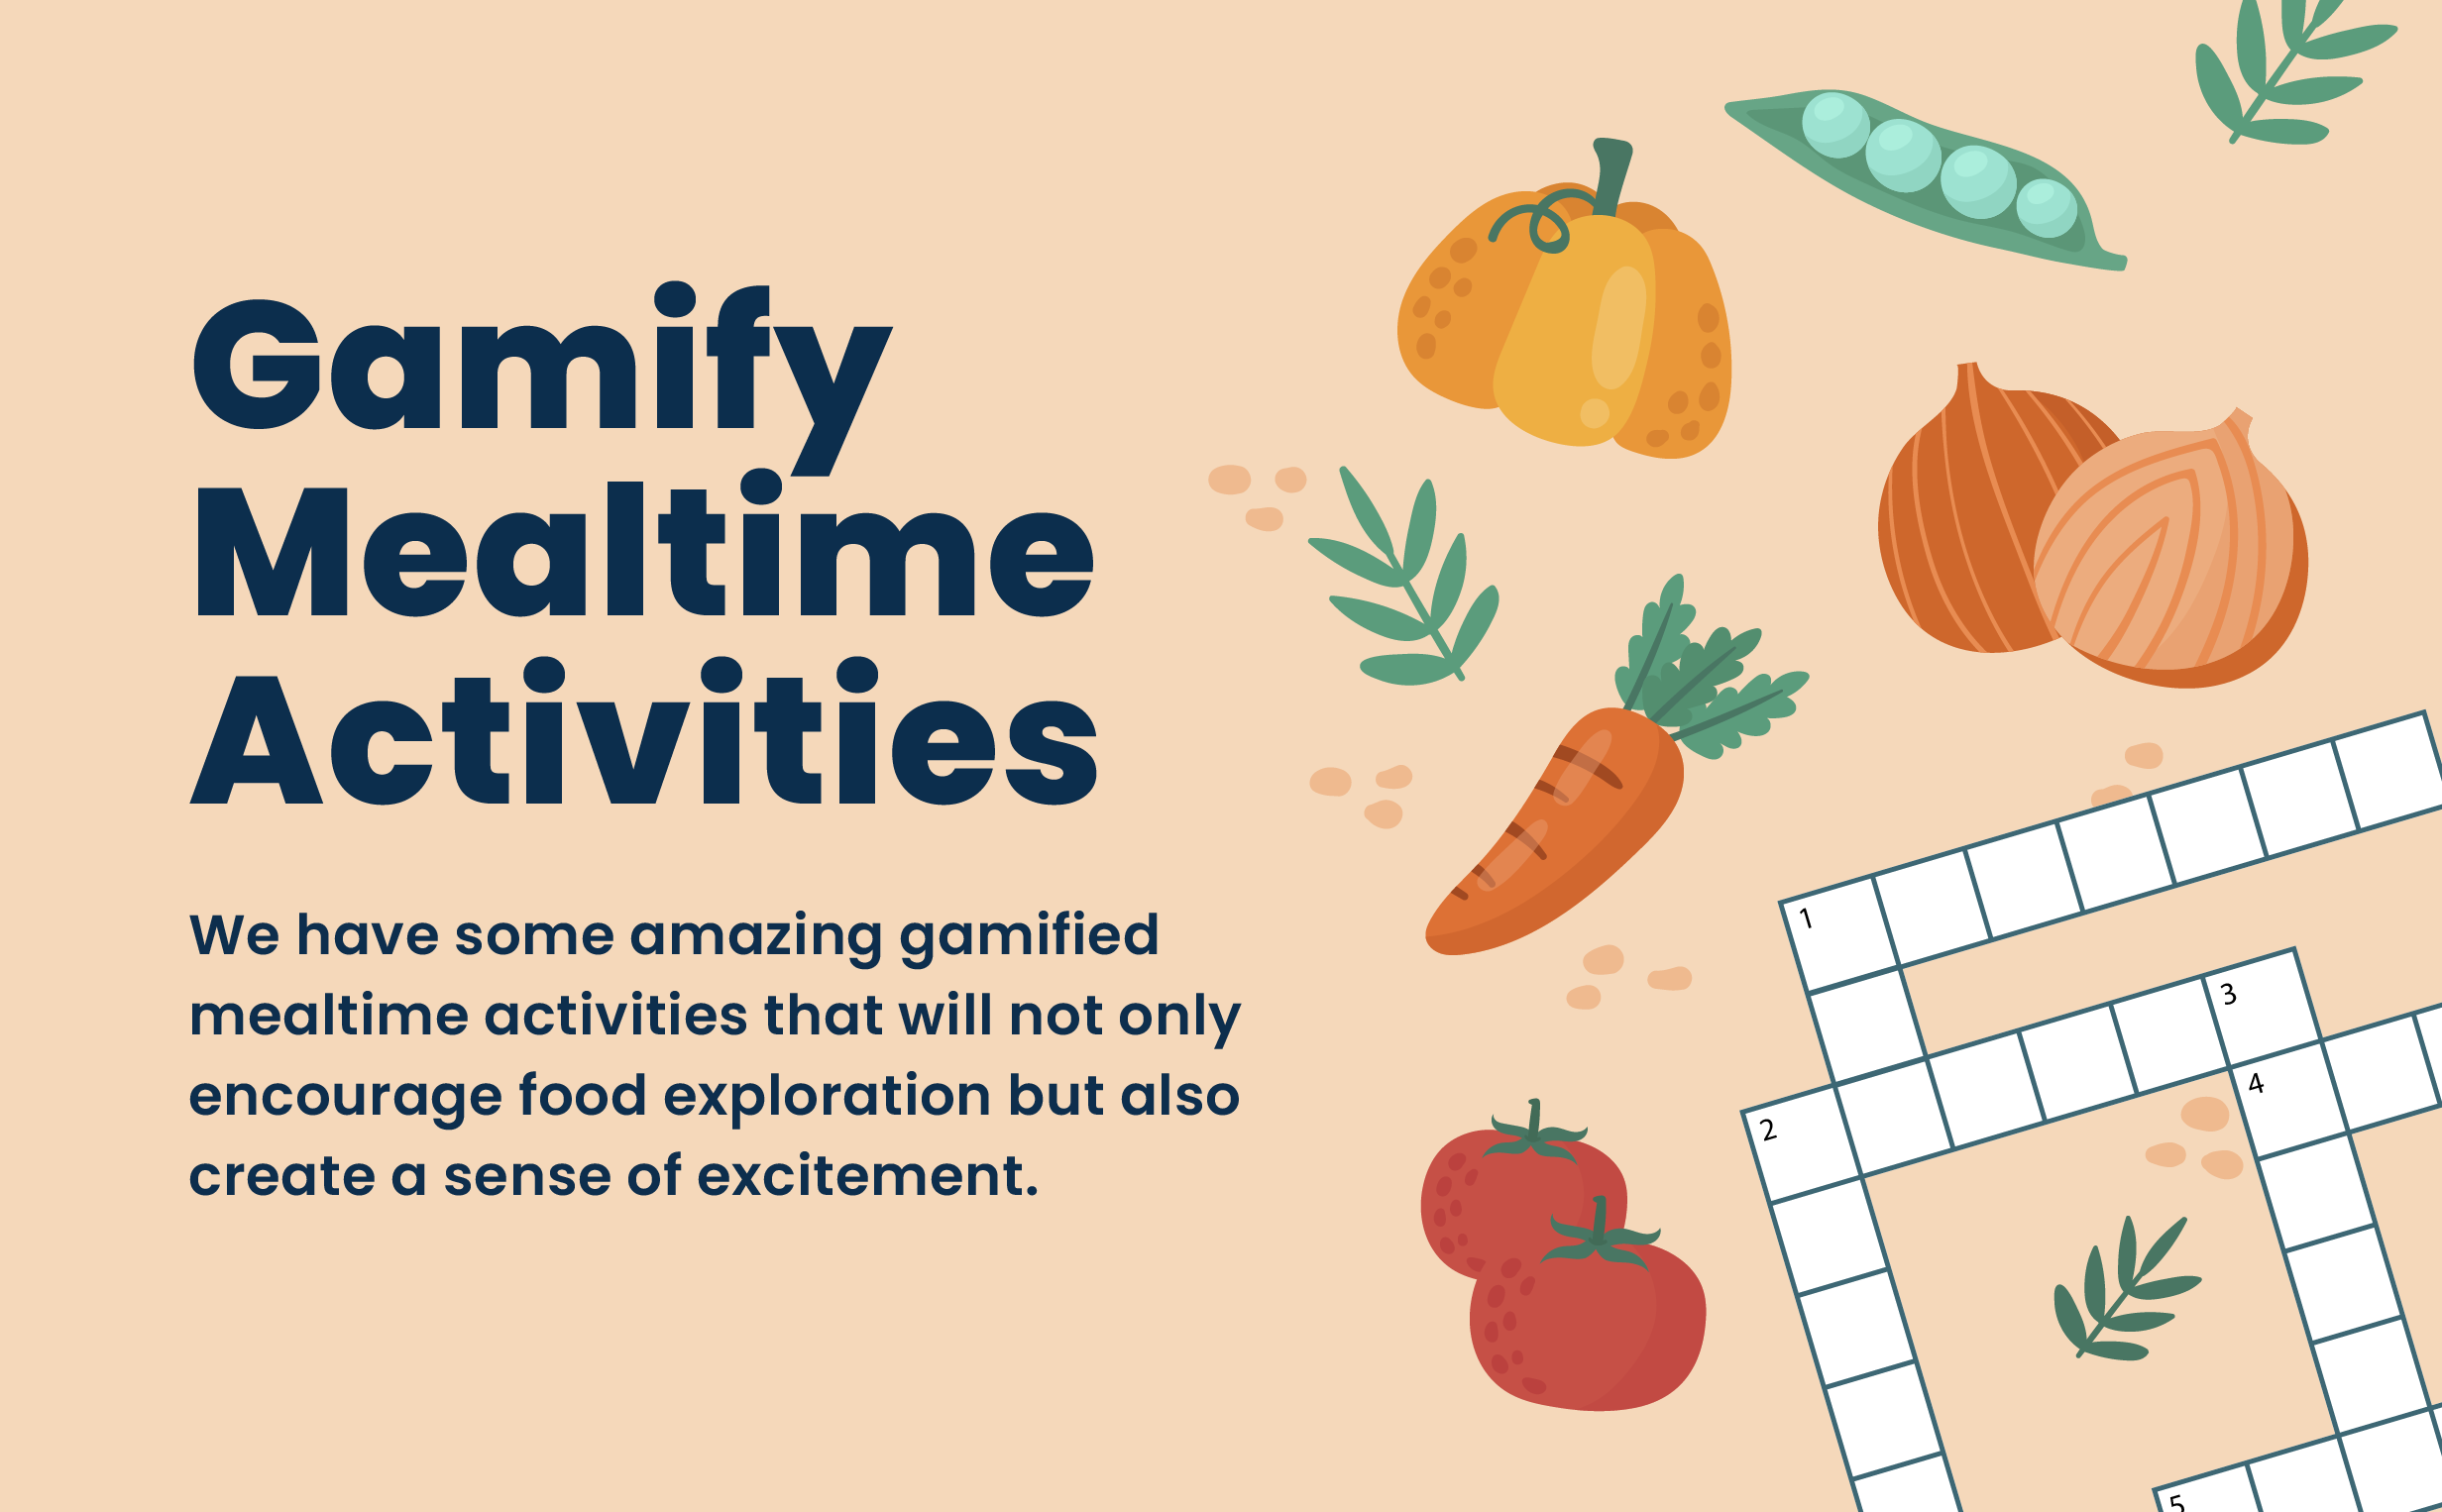 Gamify Mealtime Activities